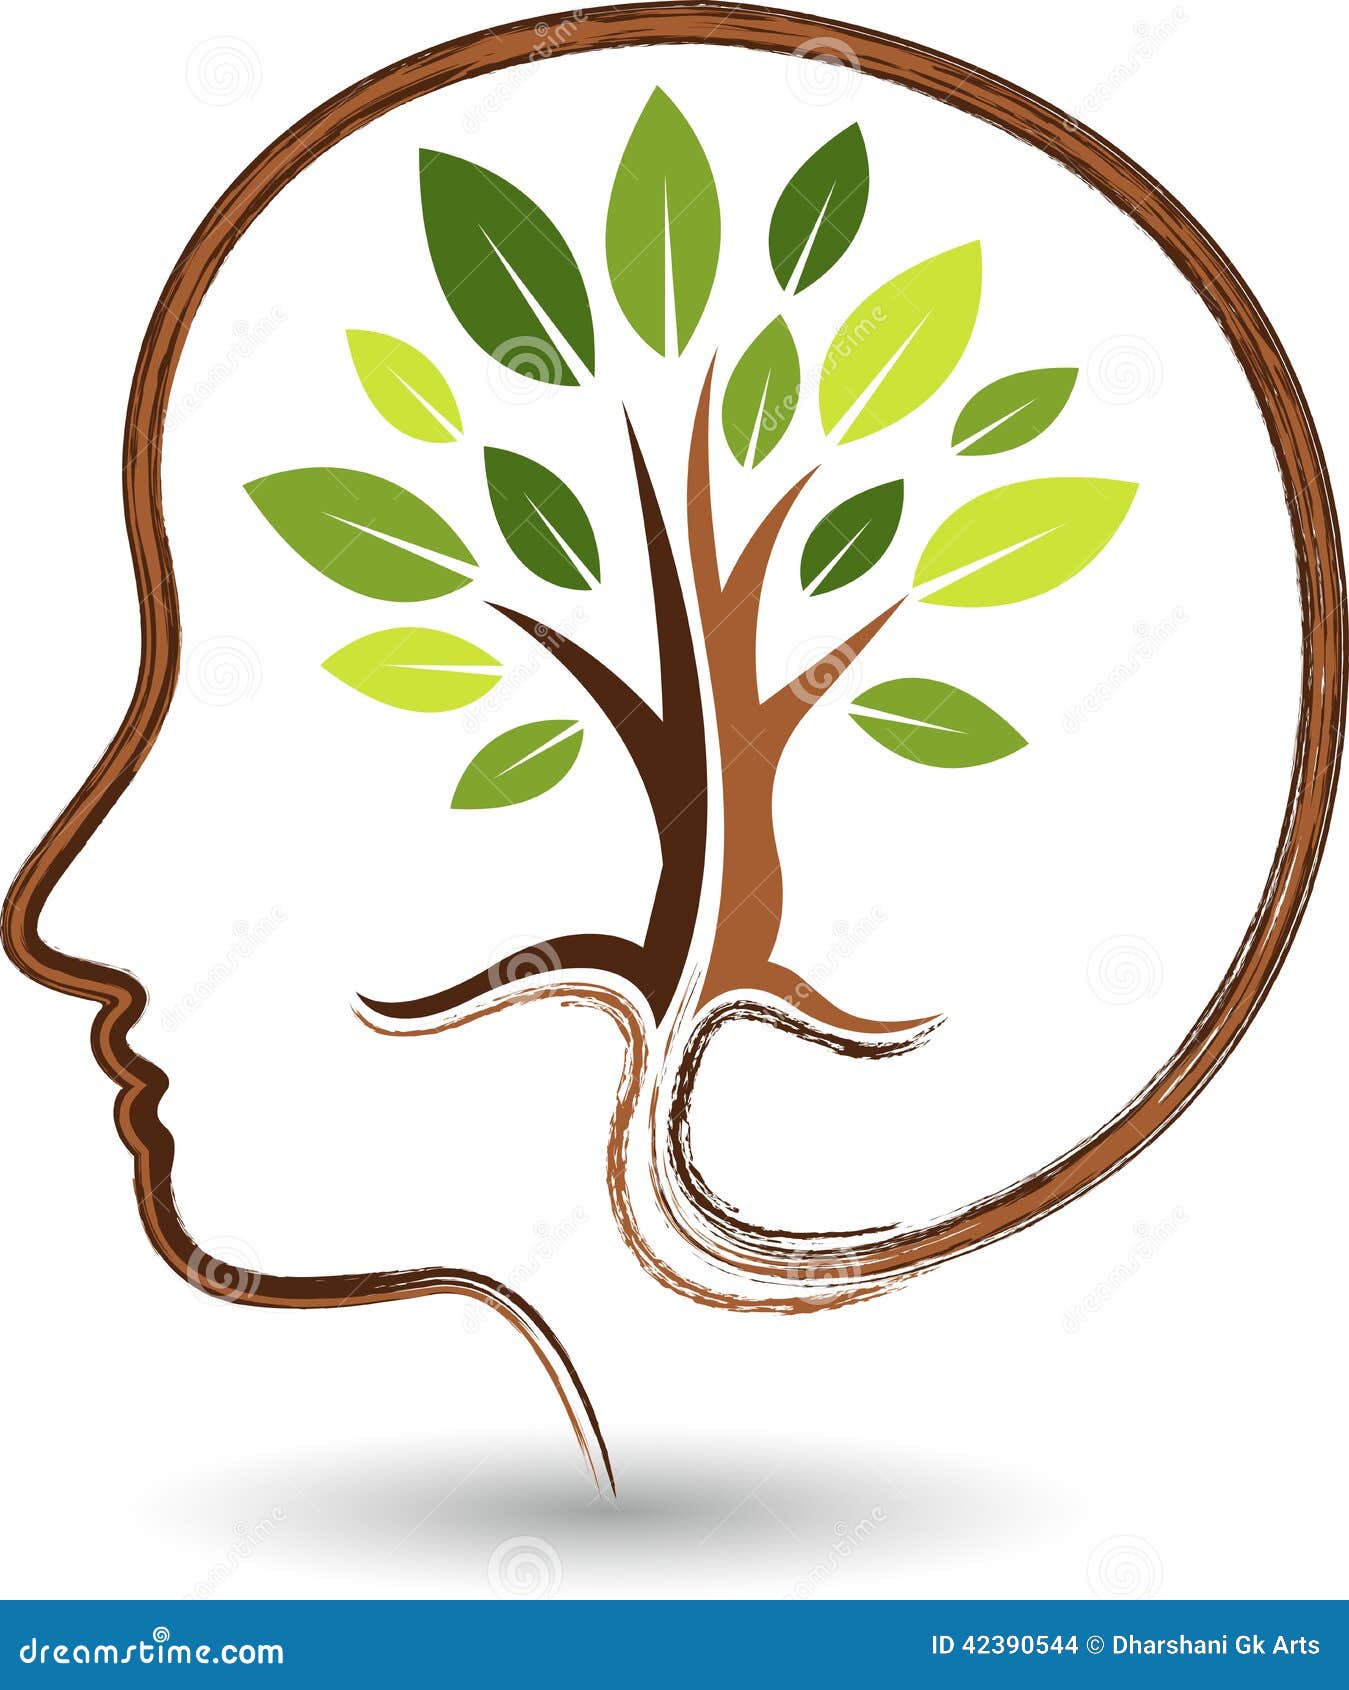 Illustration art of a mind tree logo with background.